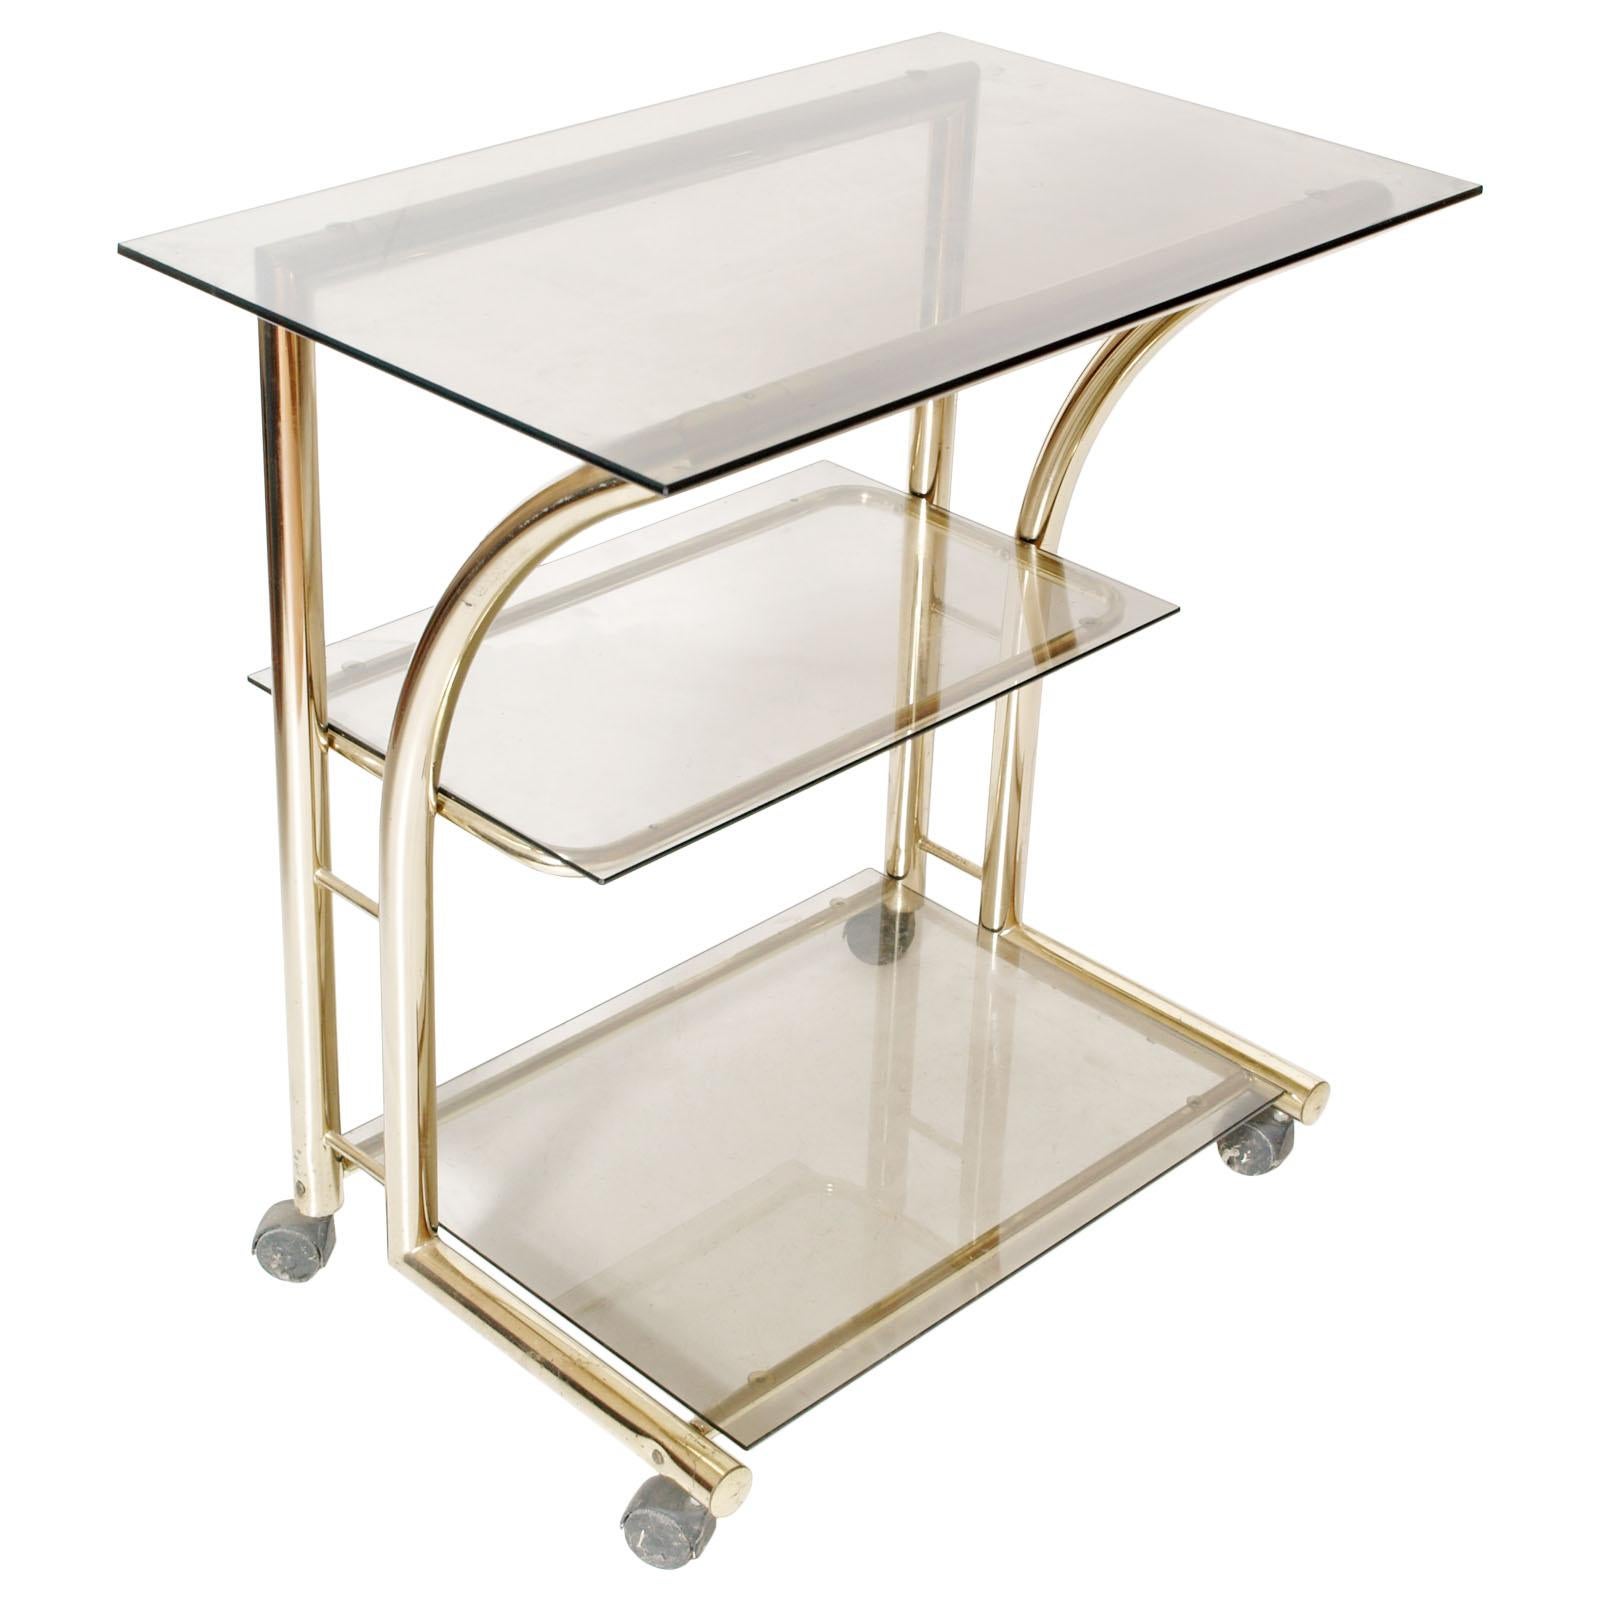 1970s Bar Cart, Occasional Table, Console, in Gilt Brass with 3 Cristal Shelves